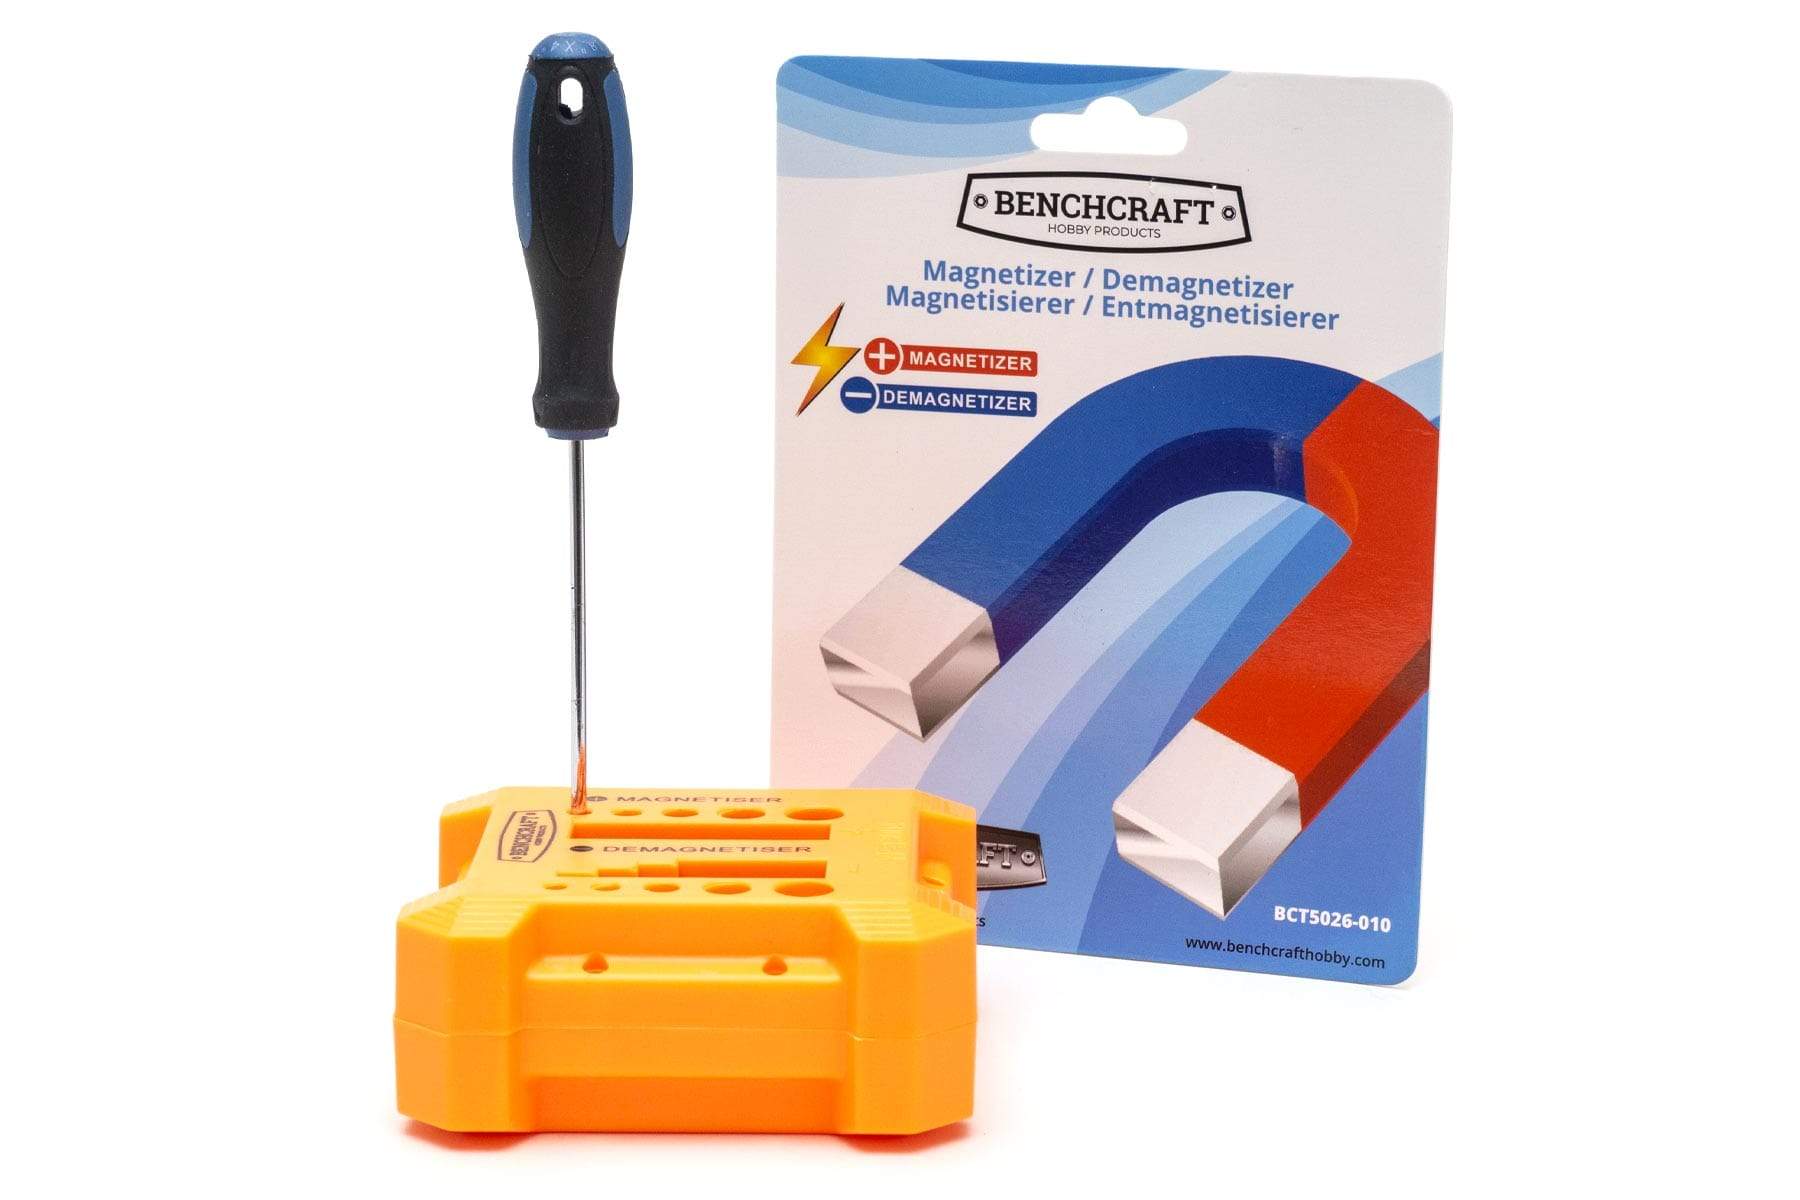 BenchCraft Magnetizer / Demagnetizer - Square and Circle BCT5026-010